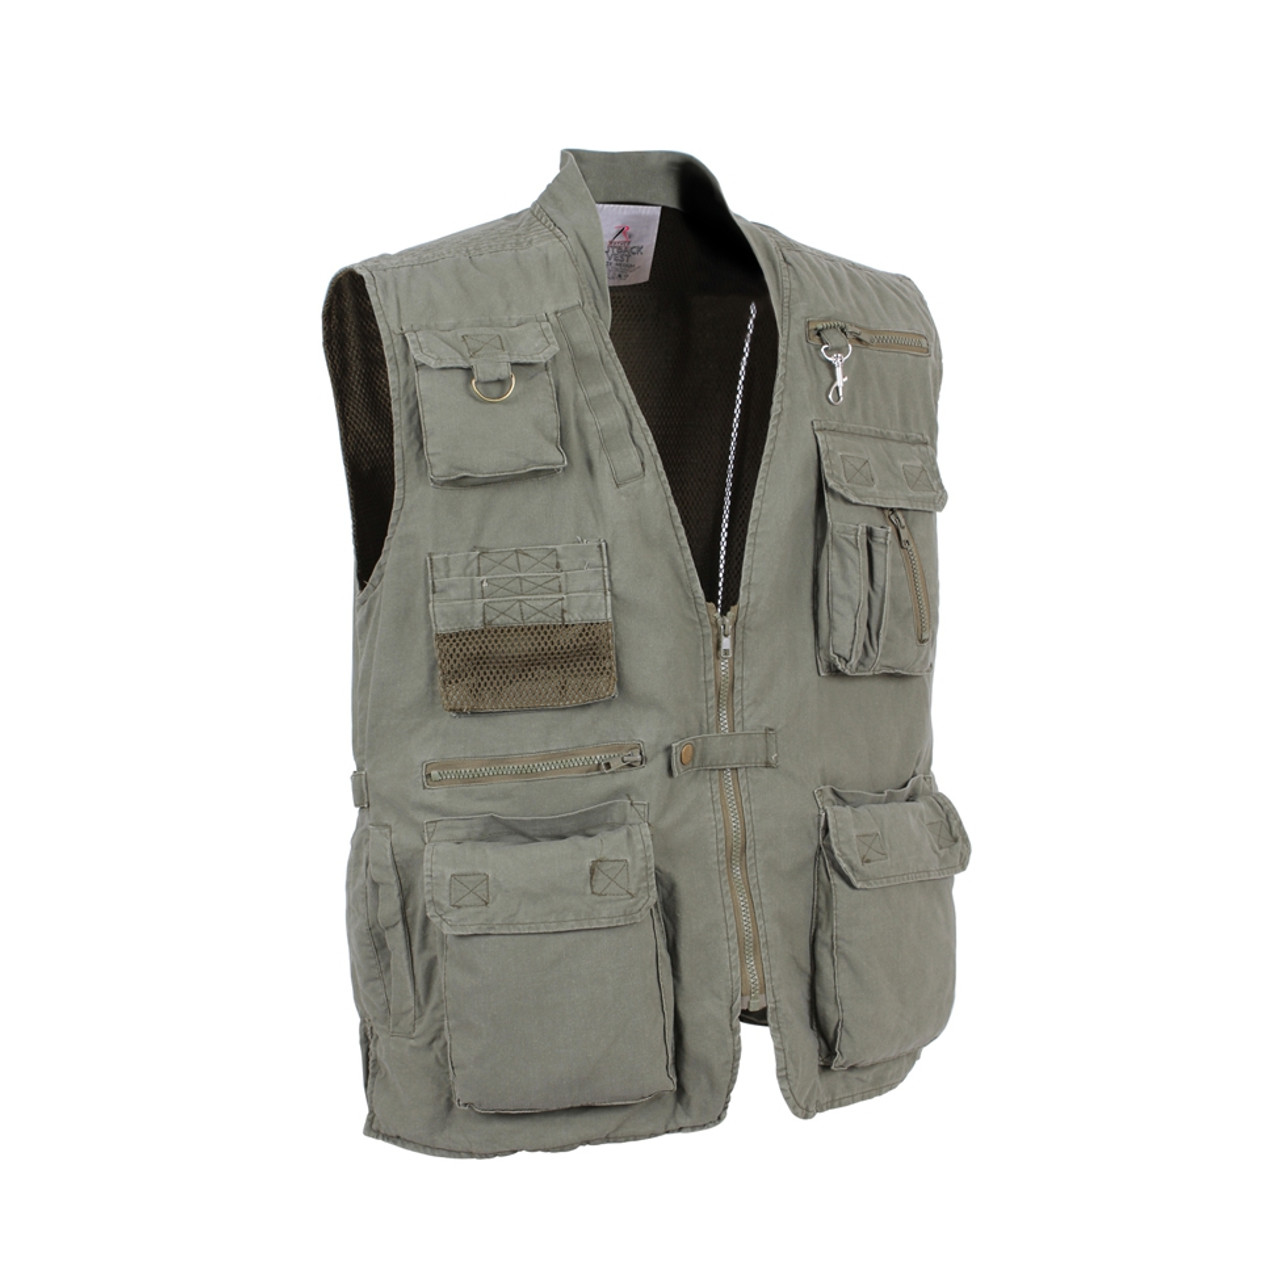 Outdoor Survival Military Travel Vest | Fatigues Army Navy Gear